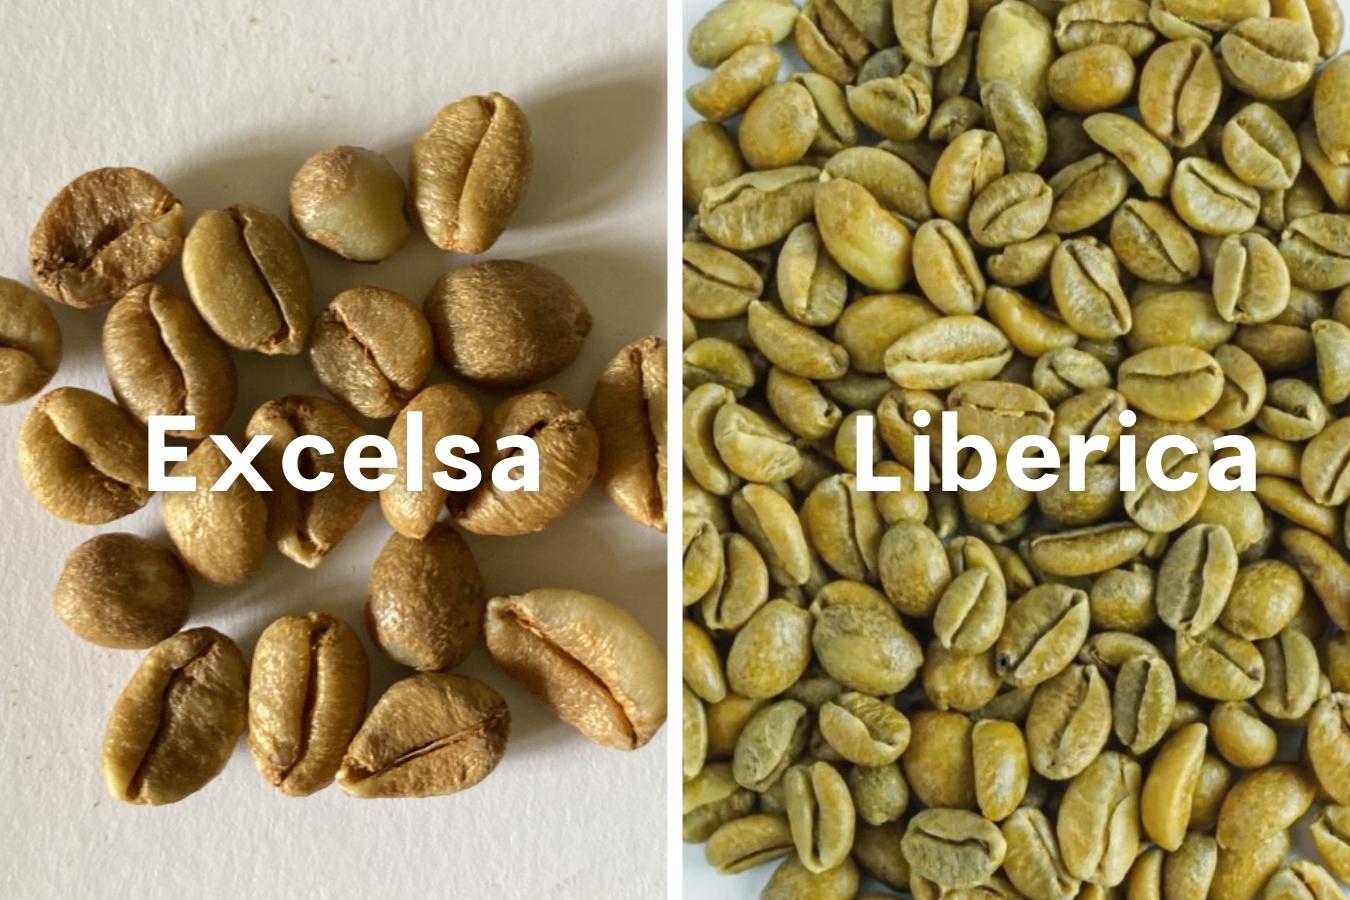 top-5-differences-between-excelsa-coffee-and-liberica-coffee (6)